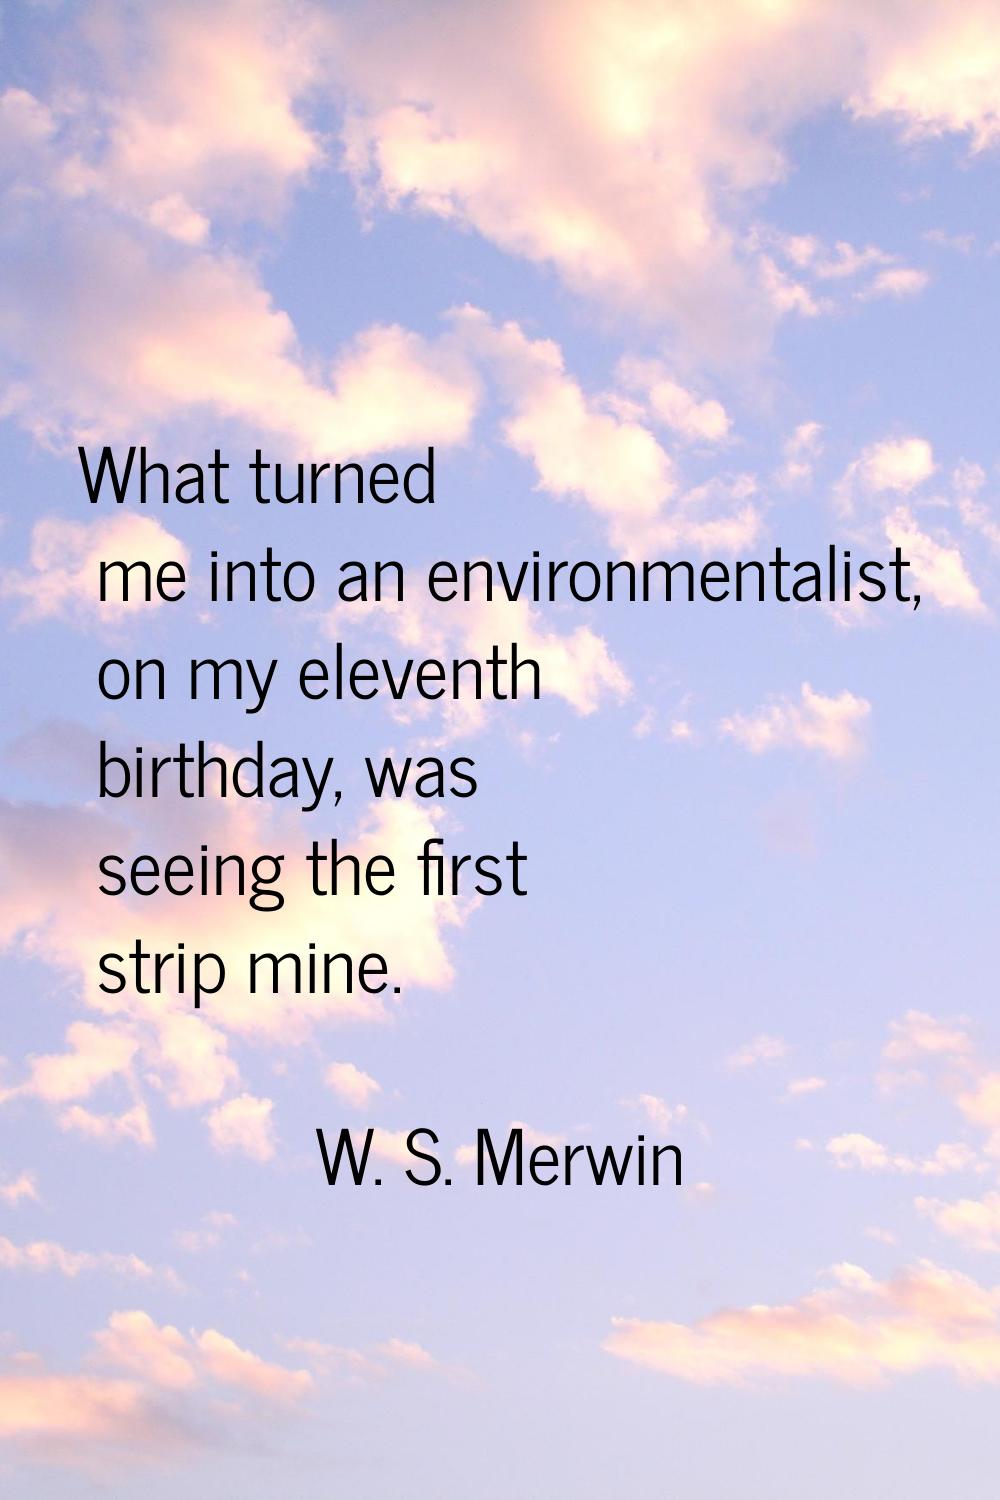 What turned me into an environmentalist, on my eleventh birthday, was seeing the first strip mine.